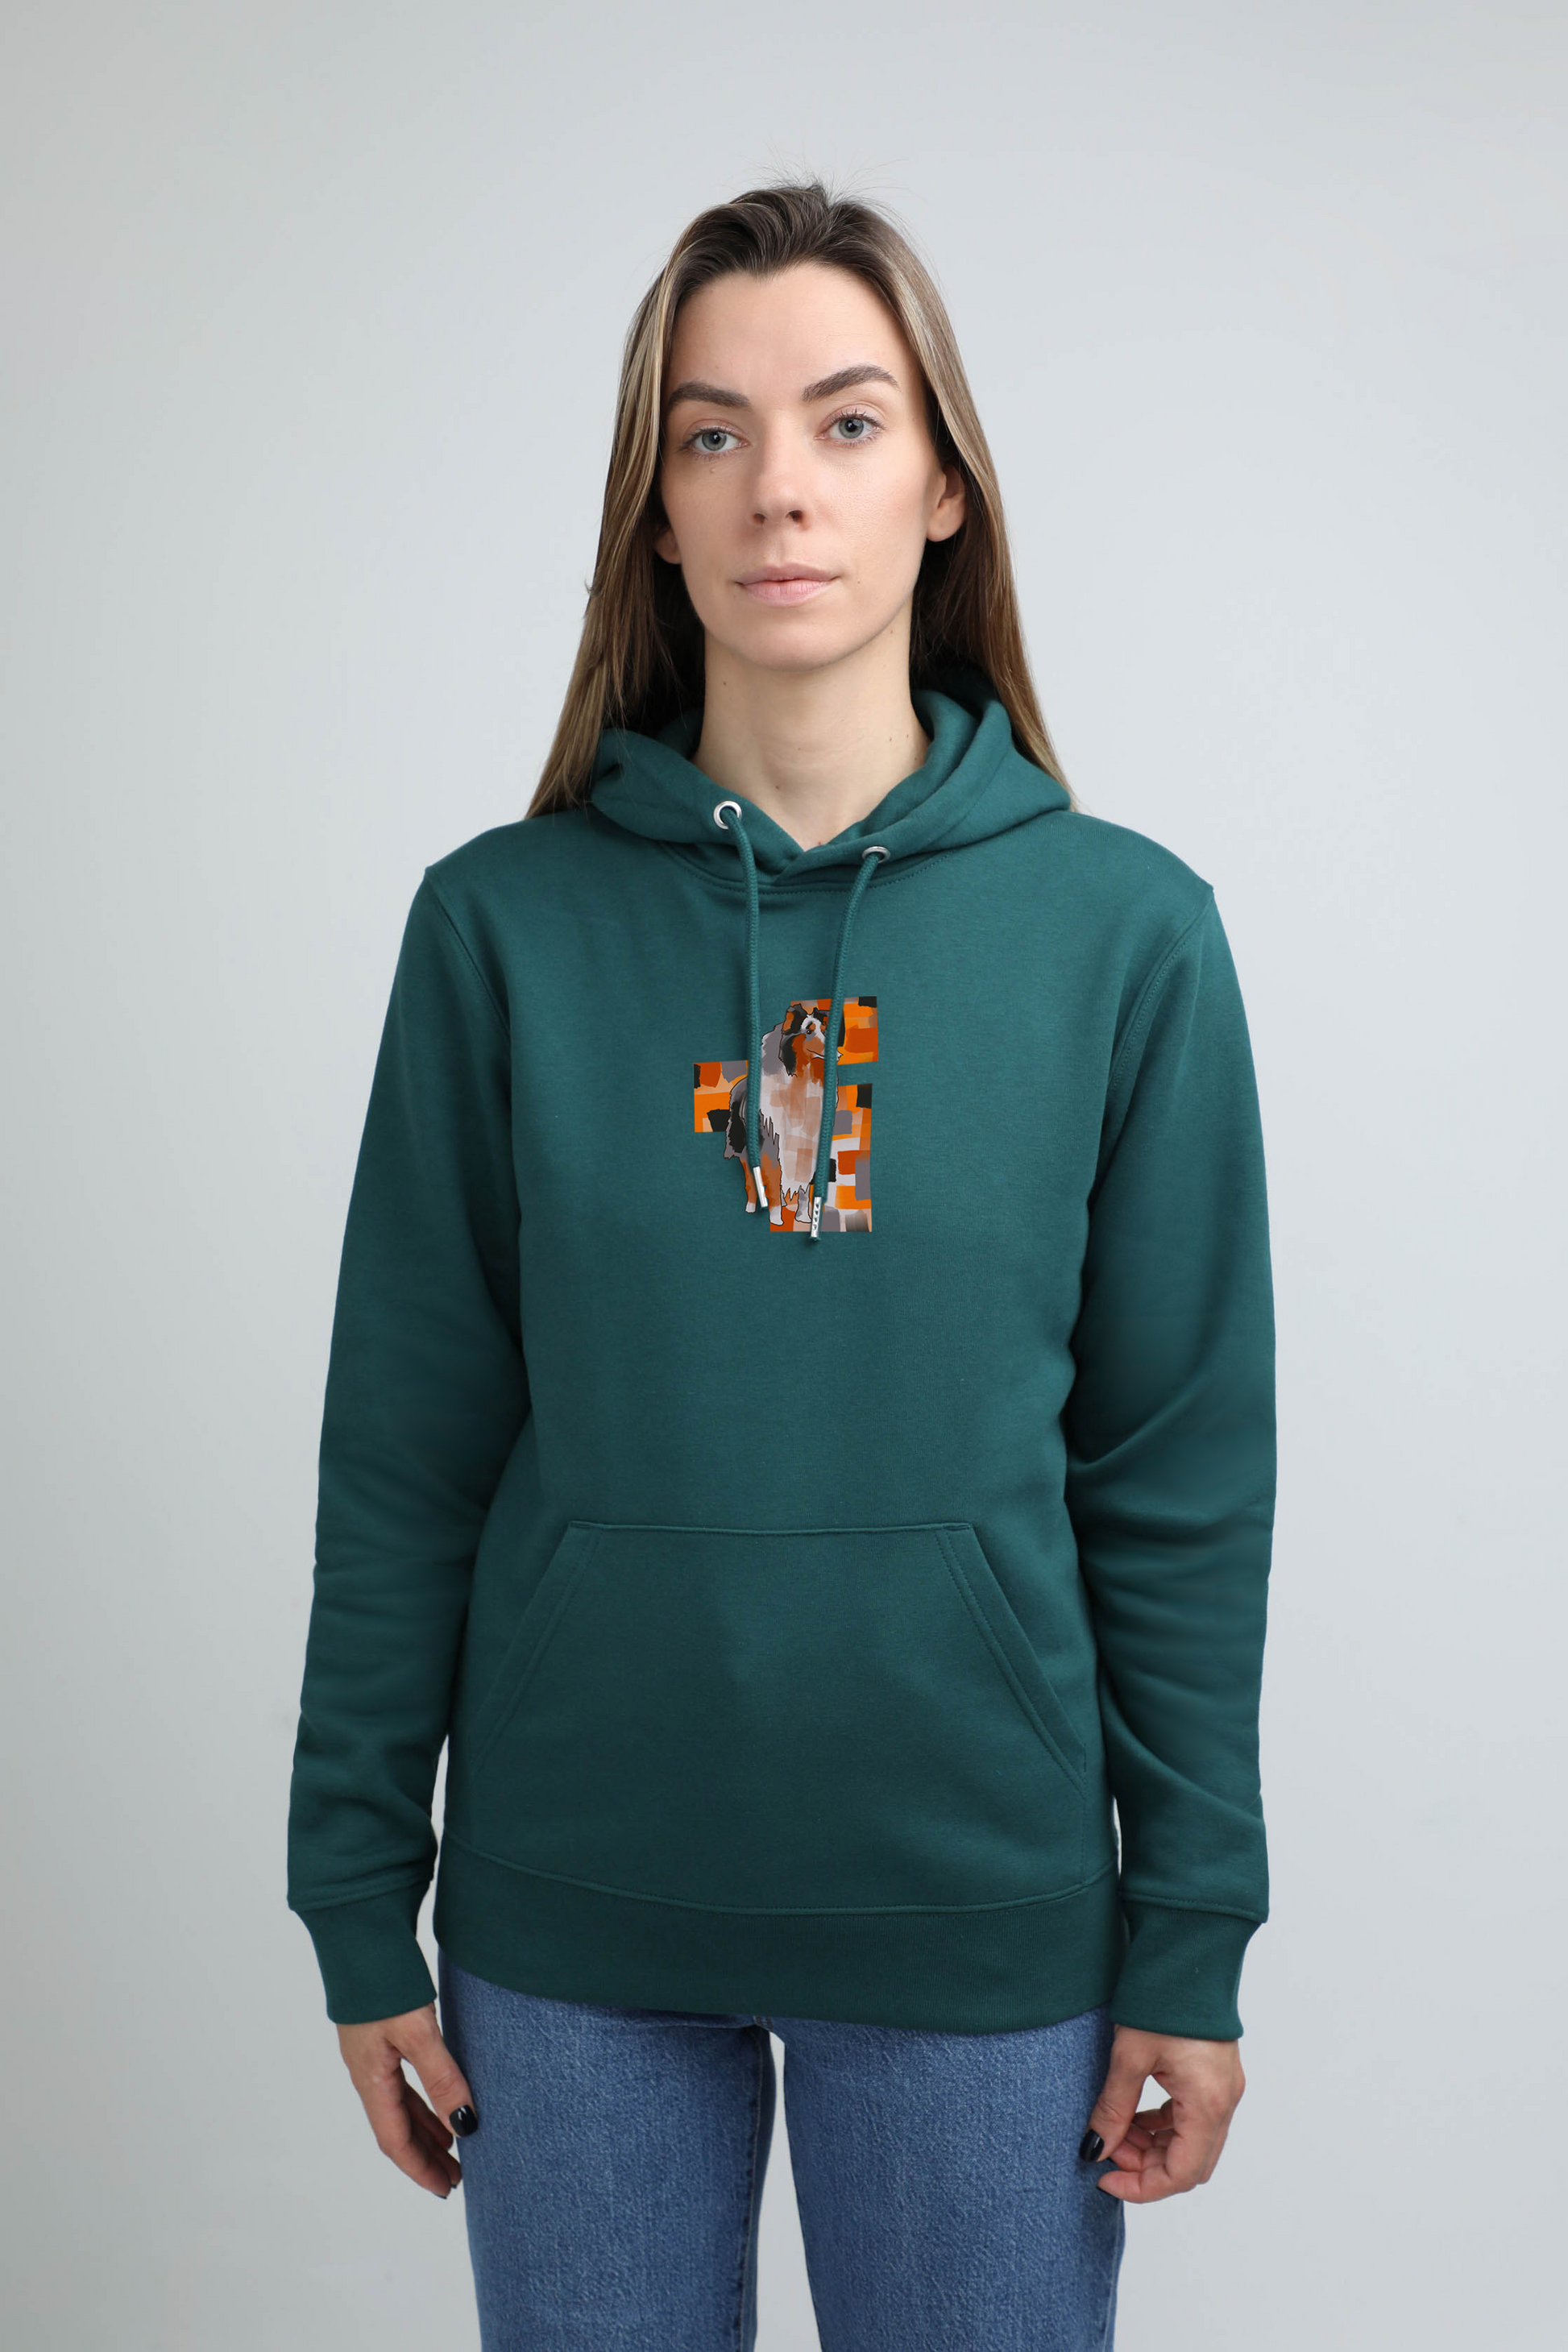 Autumn dog | Hoodie with dog. Regular fit | Unisex by My Wild Other